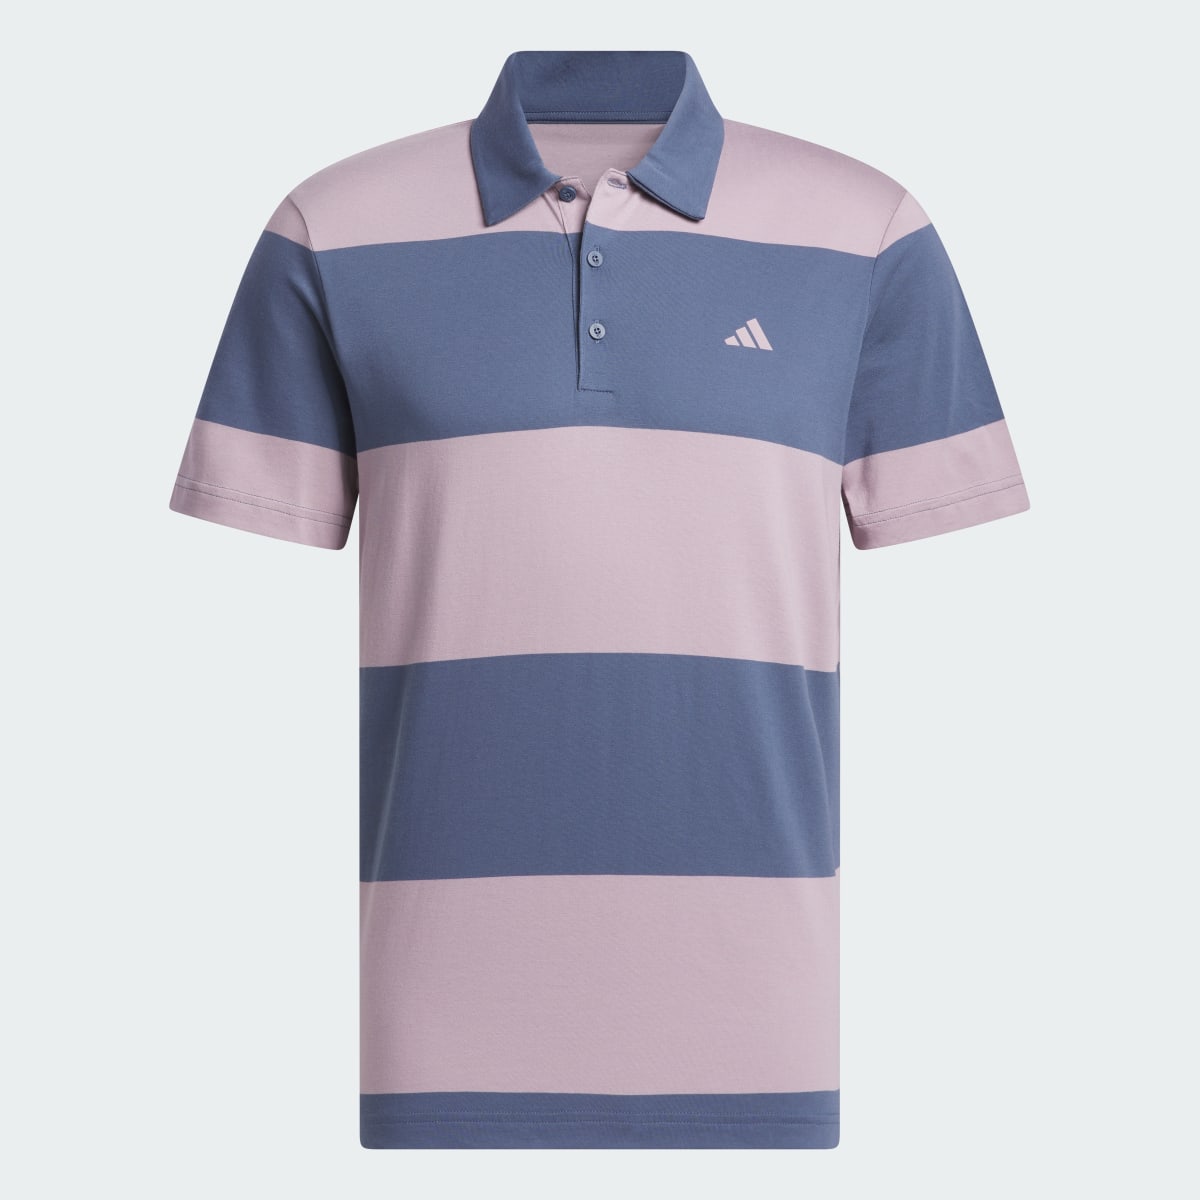 Adidas Colorblock Rugby Stripe Polo Shirt. 5